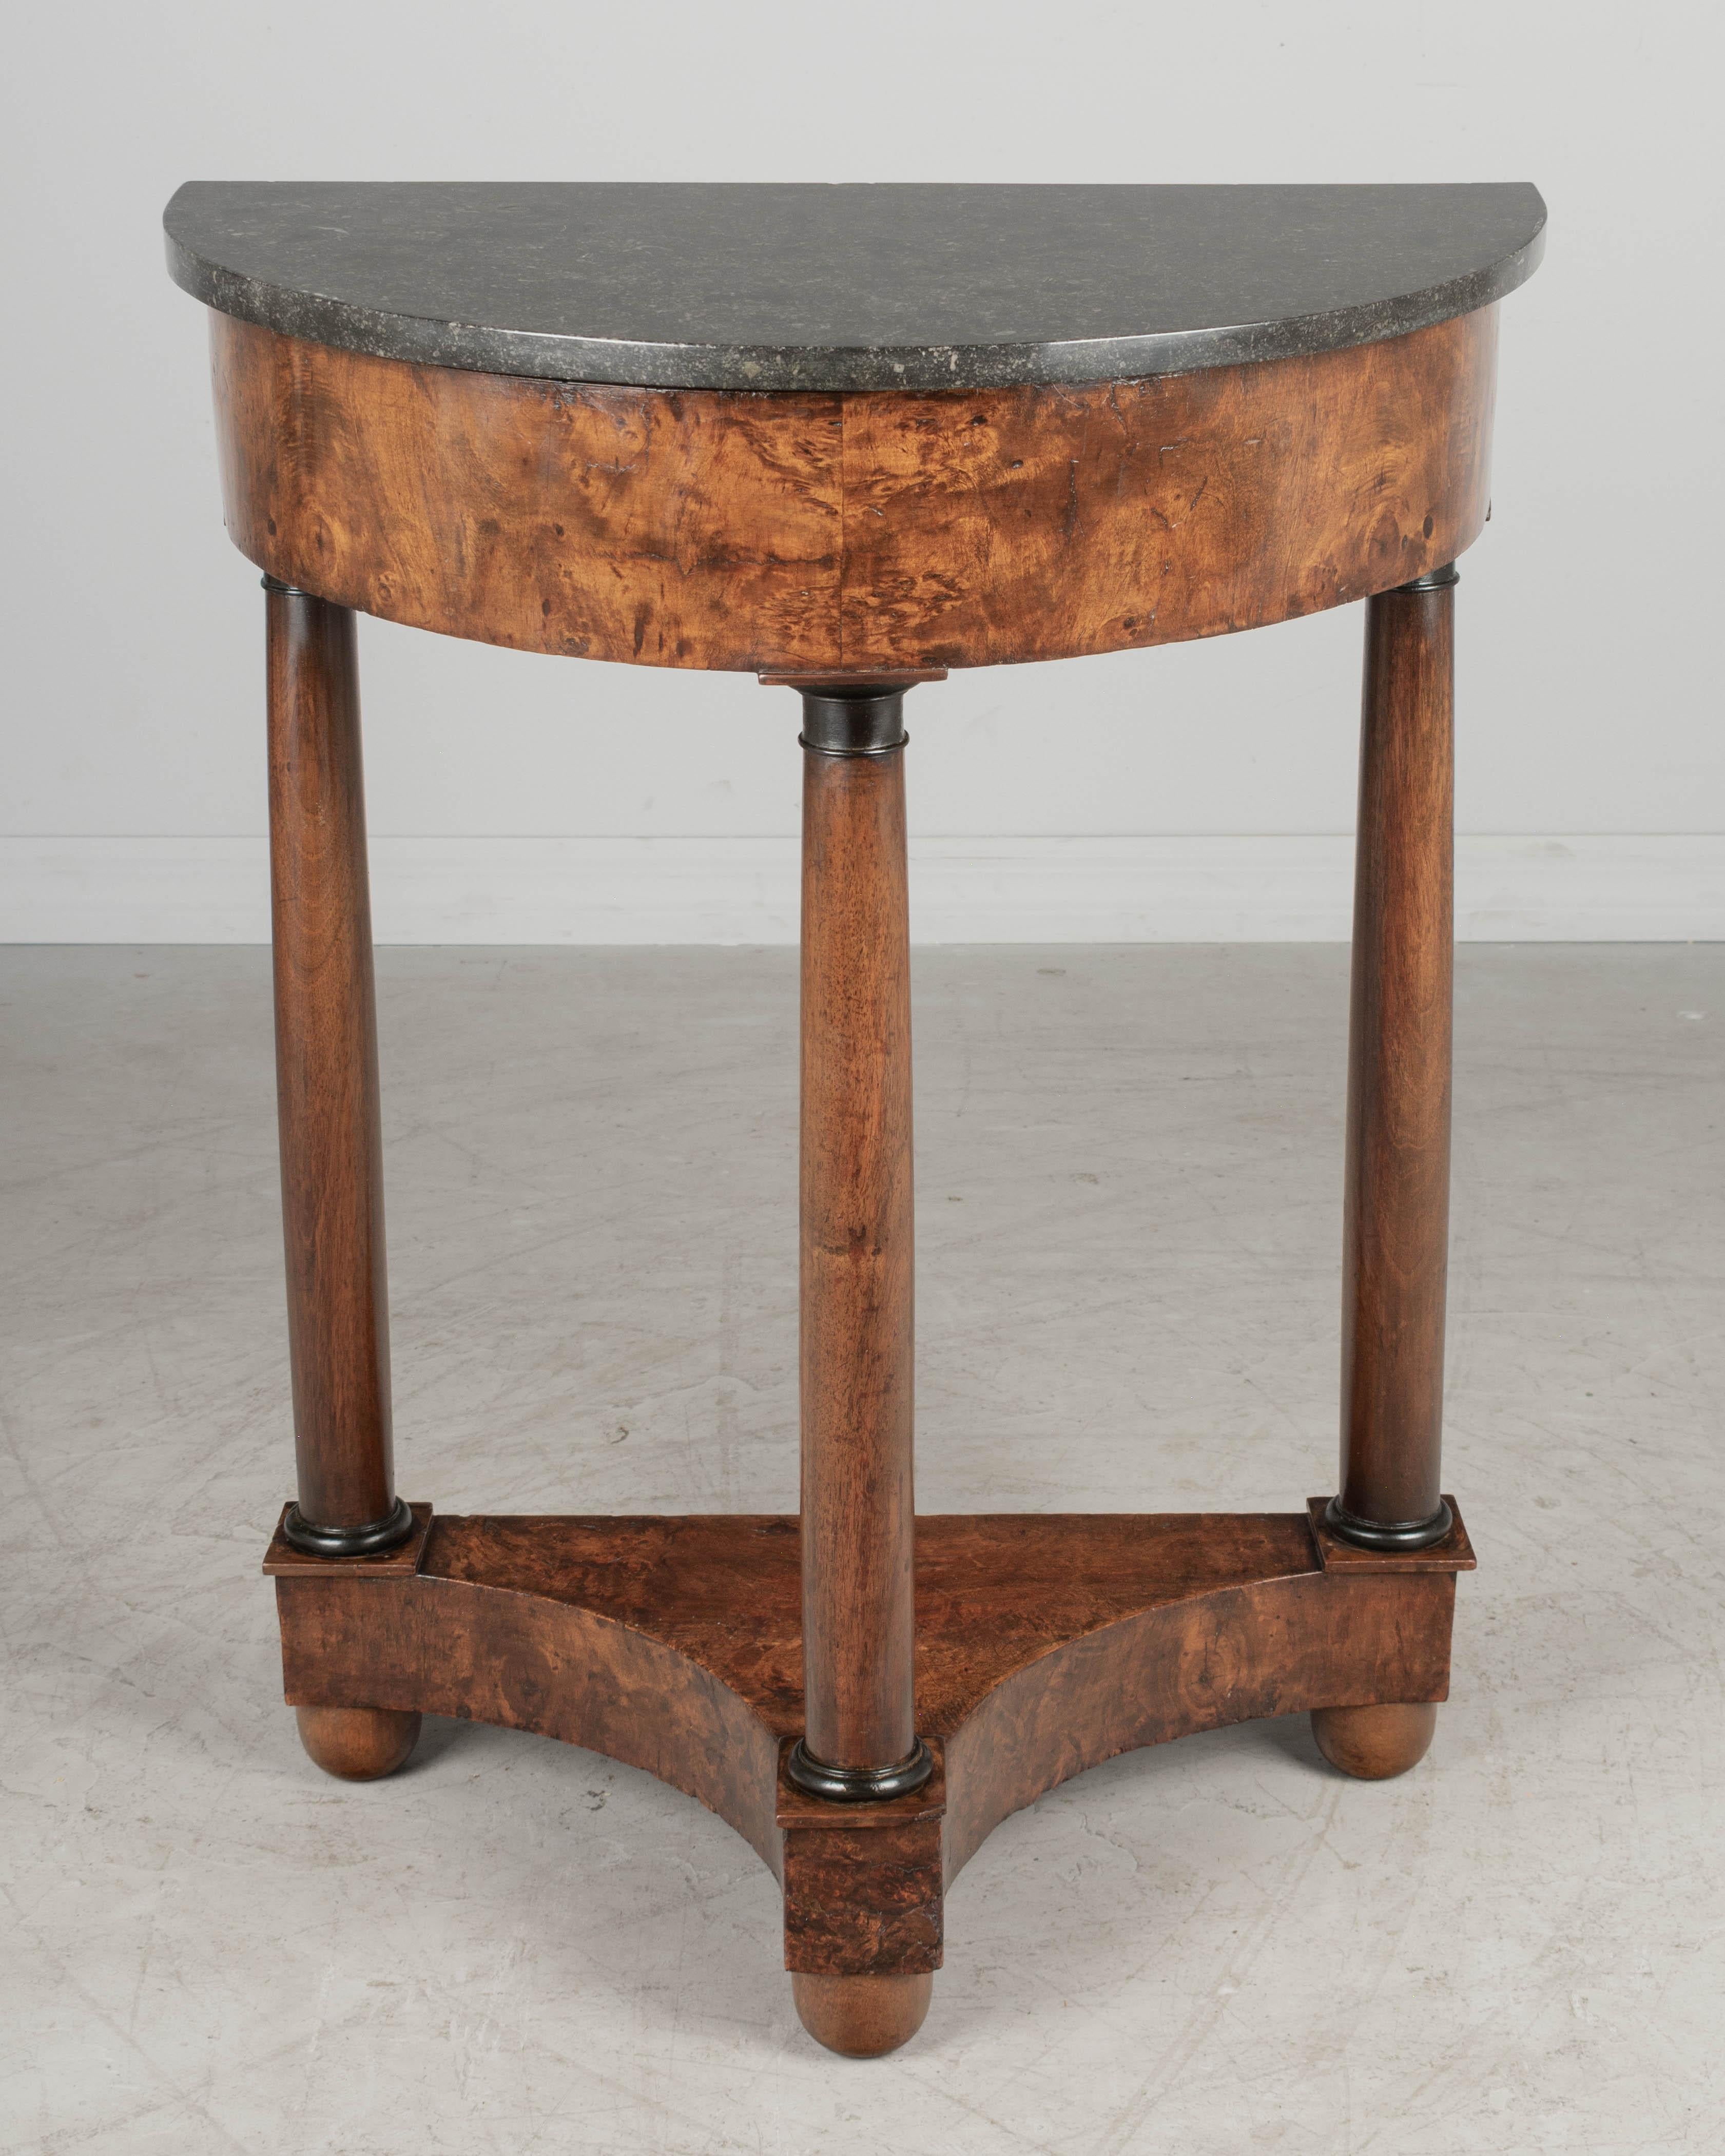 An early 19th century French Empire demilune console table with black marble top. Made of solid walnut with veneer of burled walnut. Turned columns with ebonized capitals. Good craftsmanship. All in good condition. Circa 1820-1840. Turned ball feet